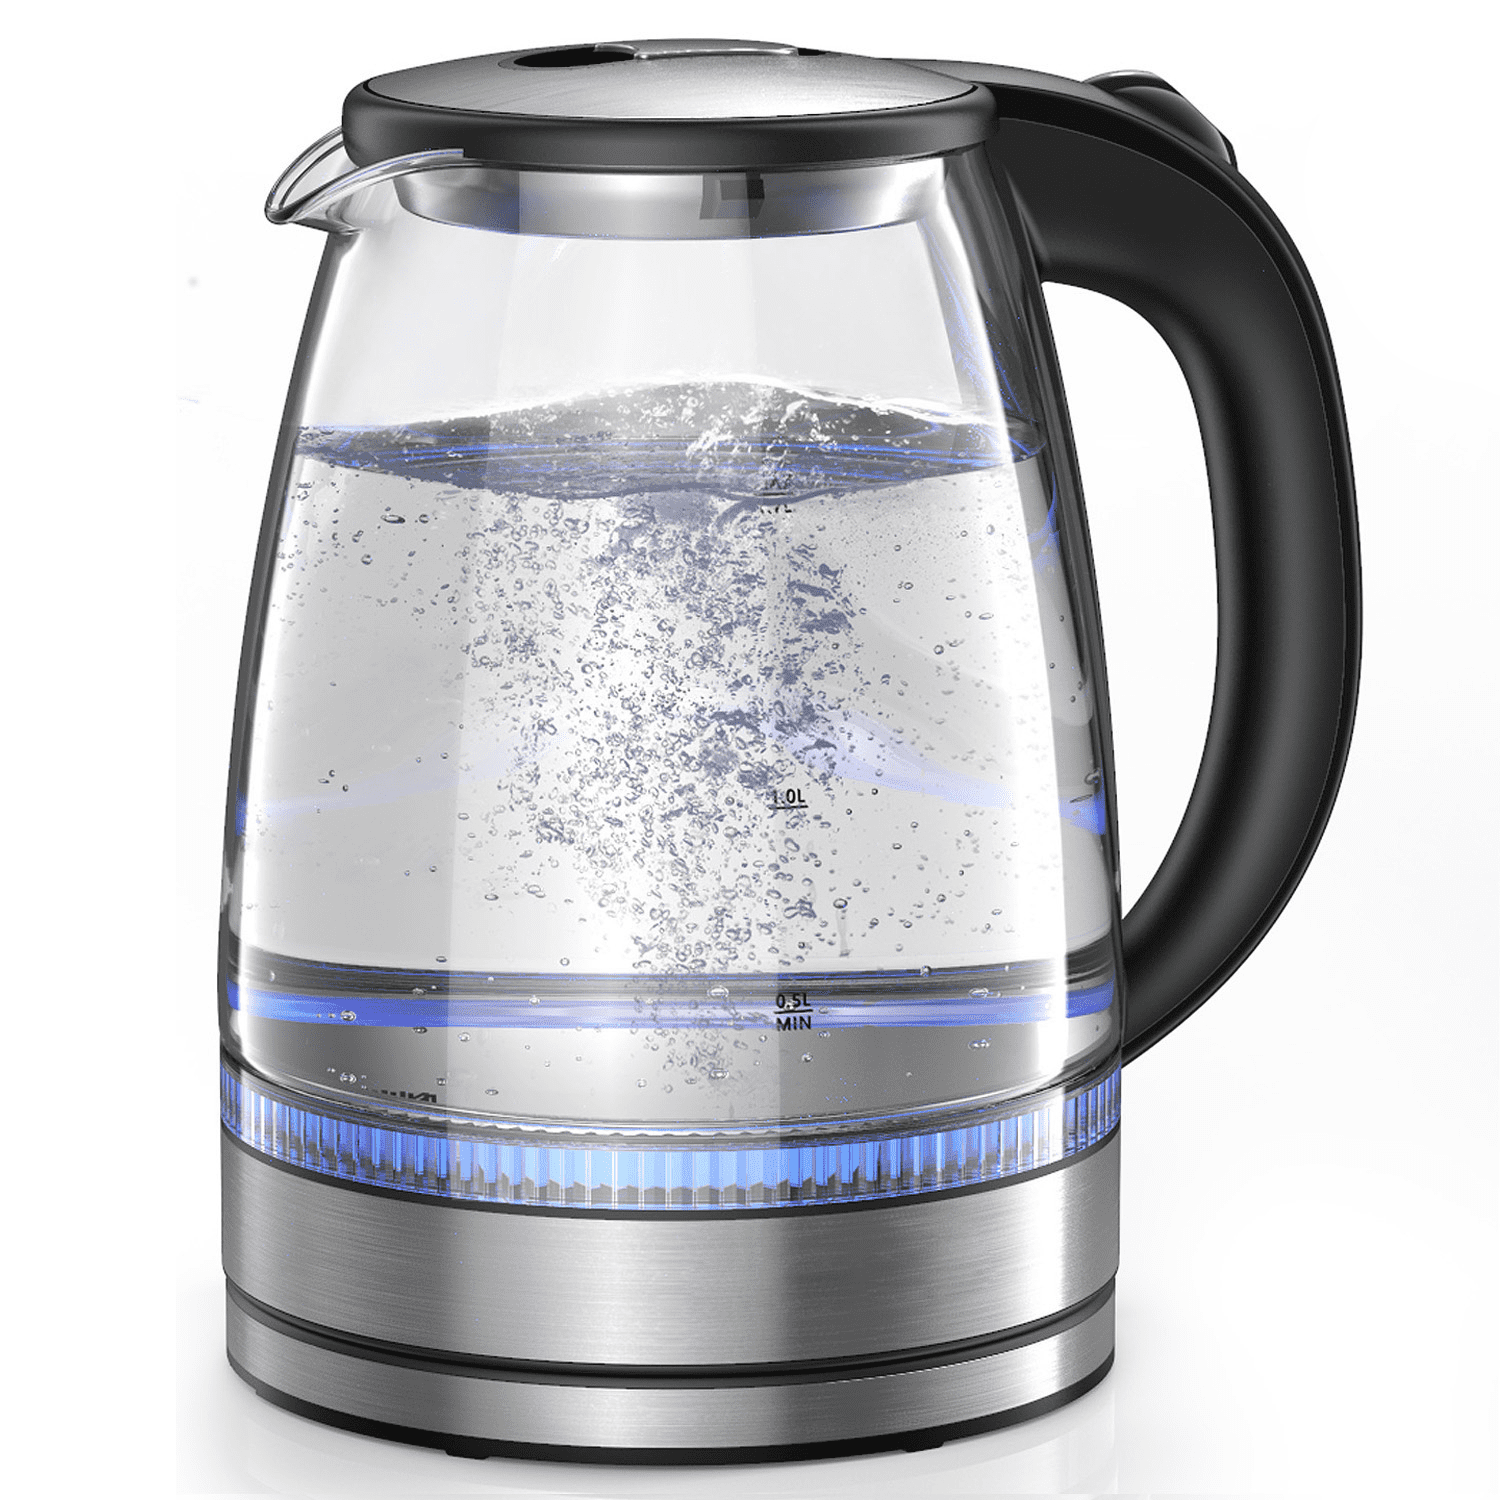 https://themarketdepot.com/wp-content/uploads/2023/01/Electric-Kettle-1.8L-Glass-Boiler-Coffee-Pot-Water-Heater-7-Big-Cups-with-Quick-Boil-Auto-Shut-Off-Boil-Dry-Protection-1.png